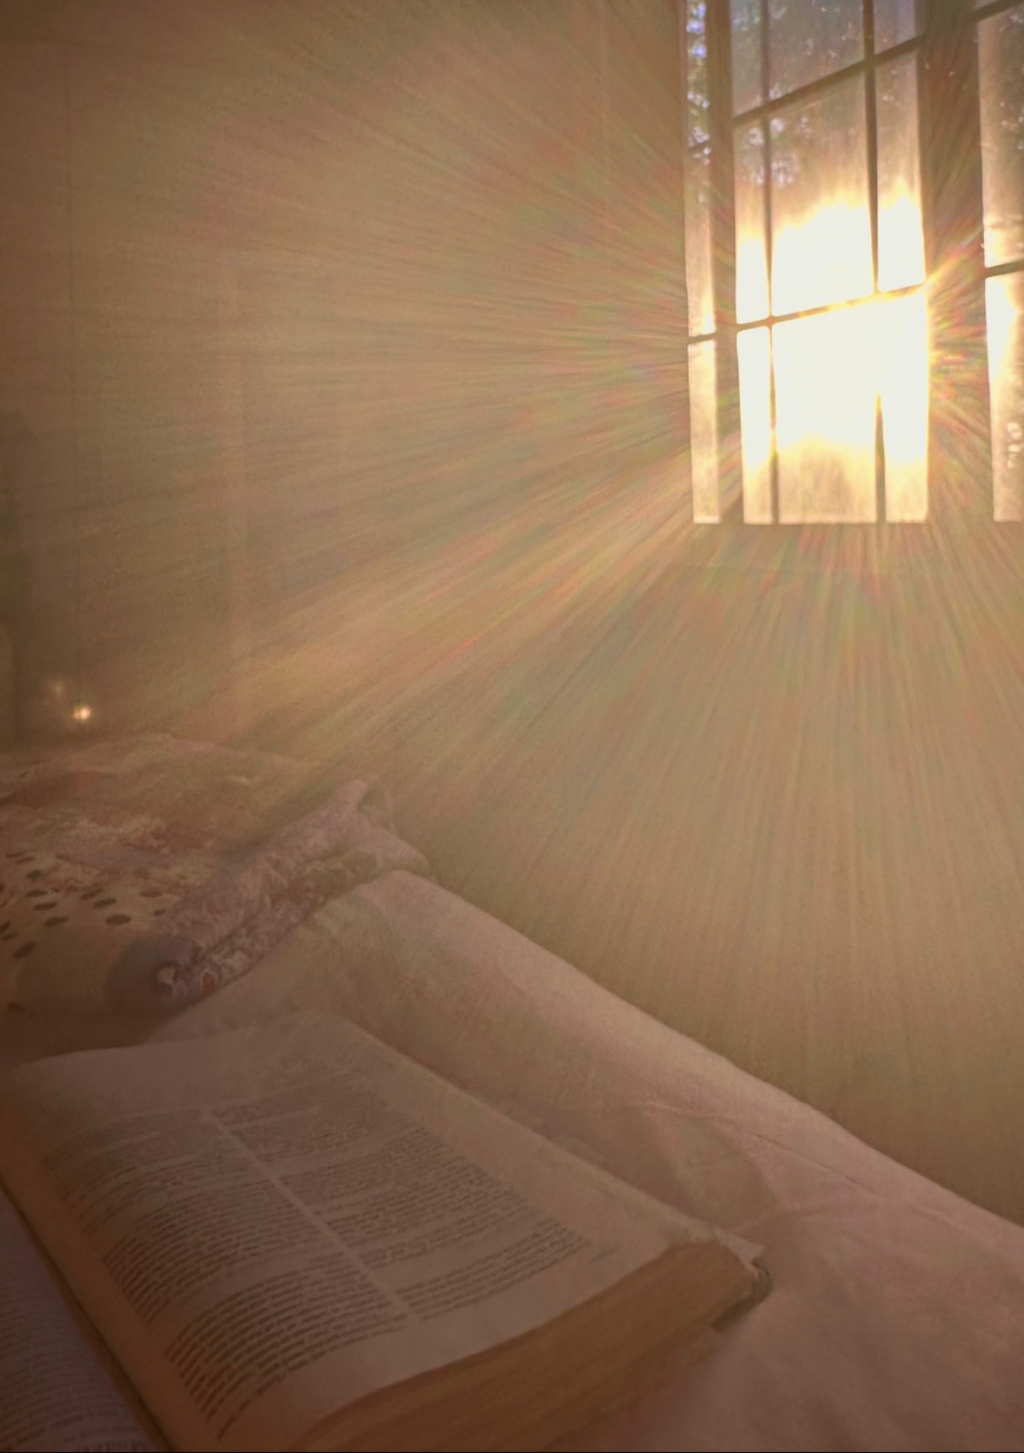 the sun shines through a window, an open Bible lays on the bed as rays cast across it